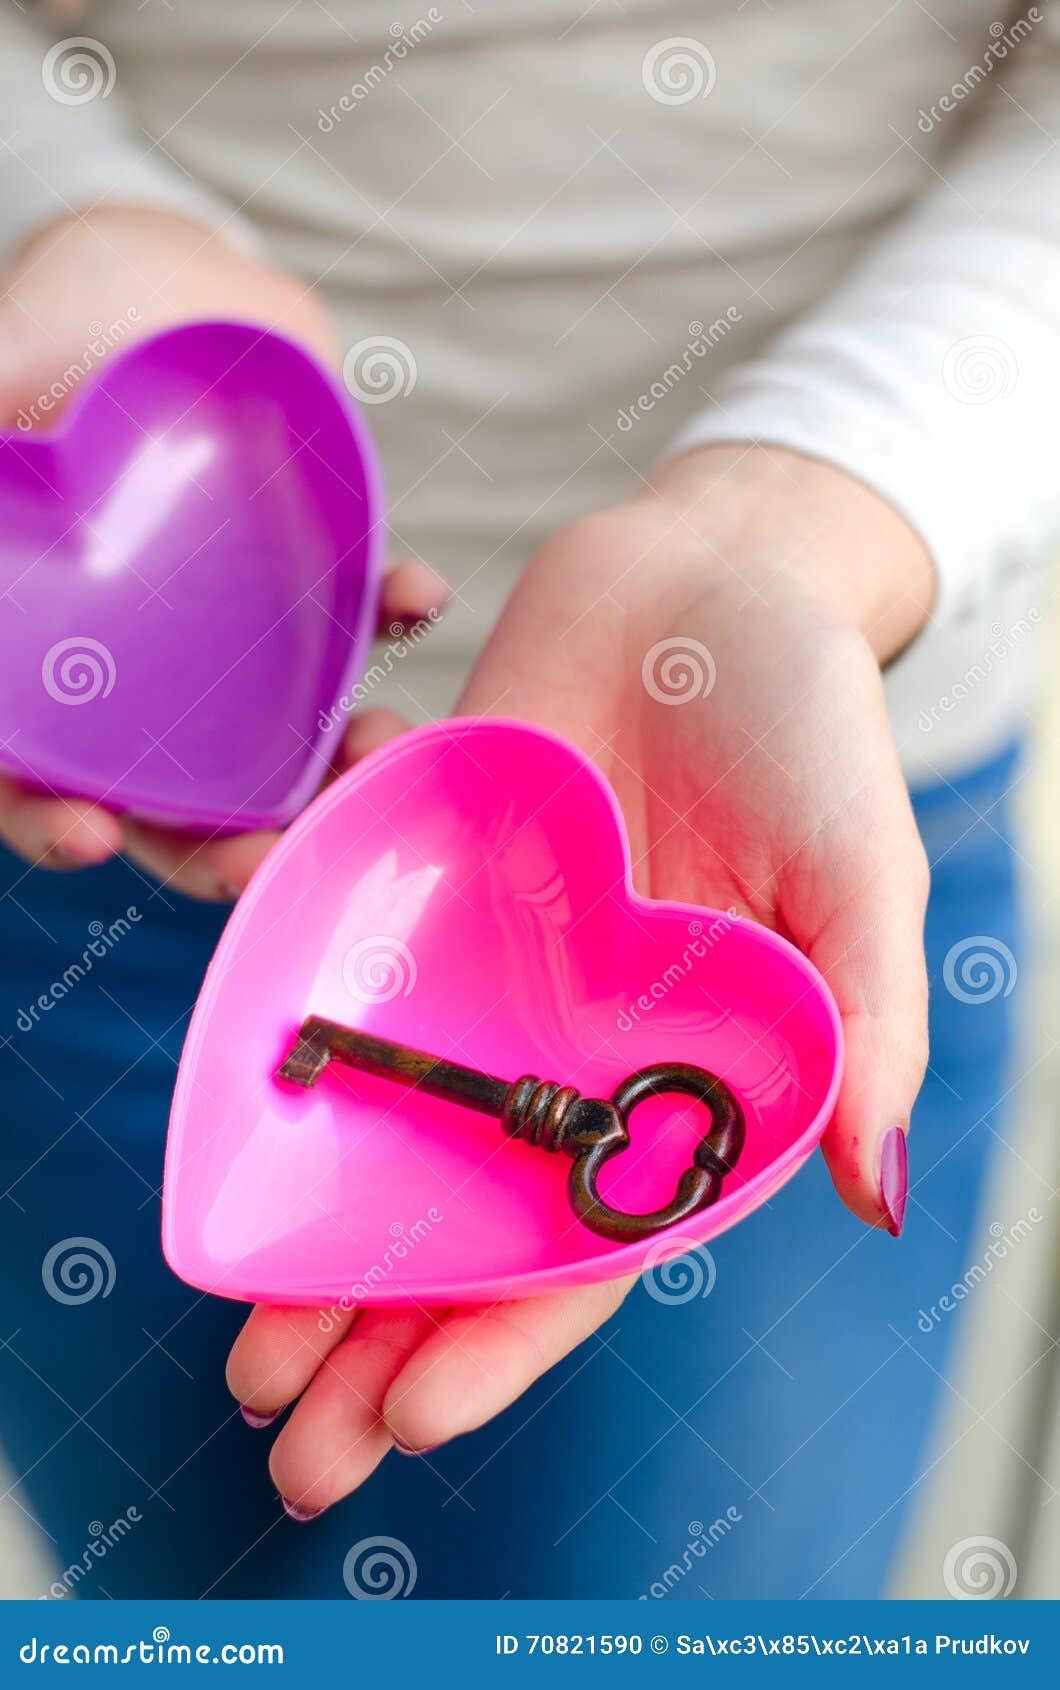 girl offering key to her heart